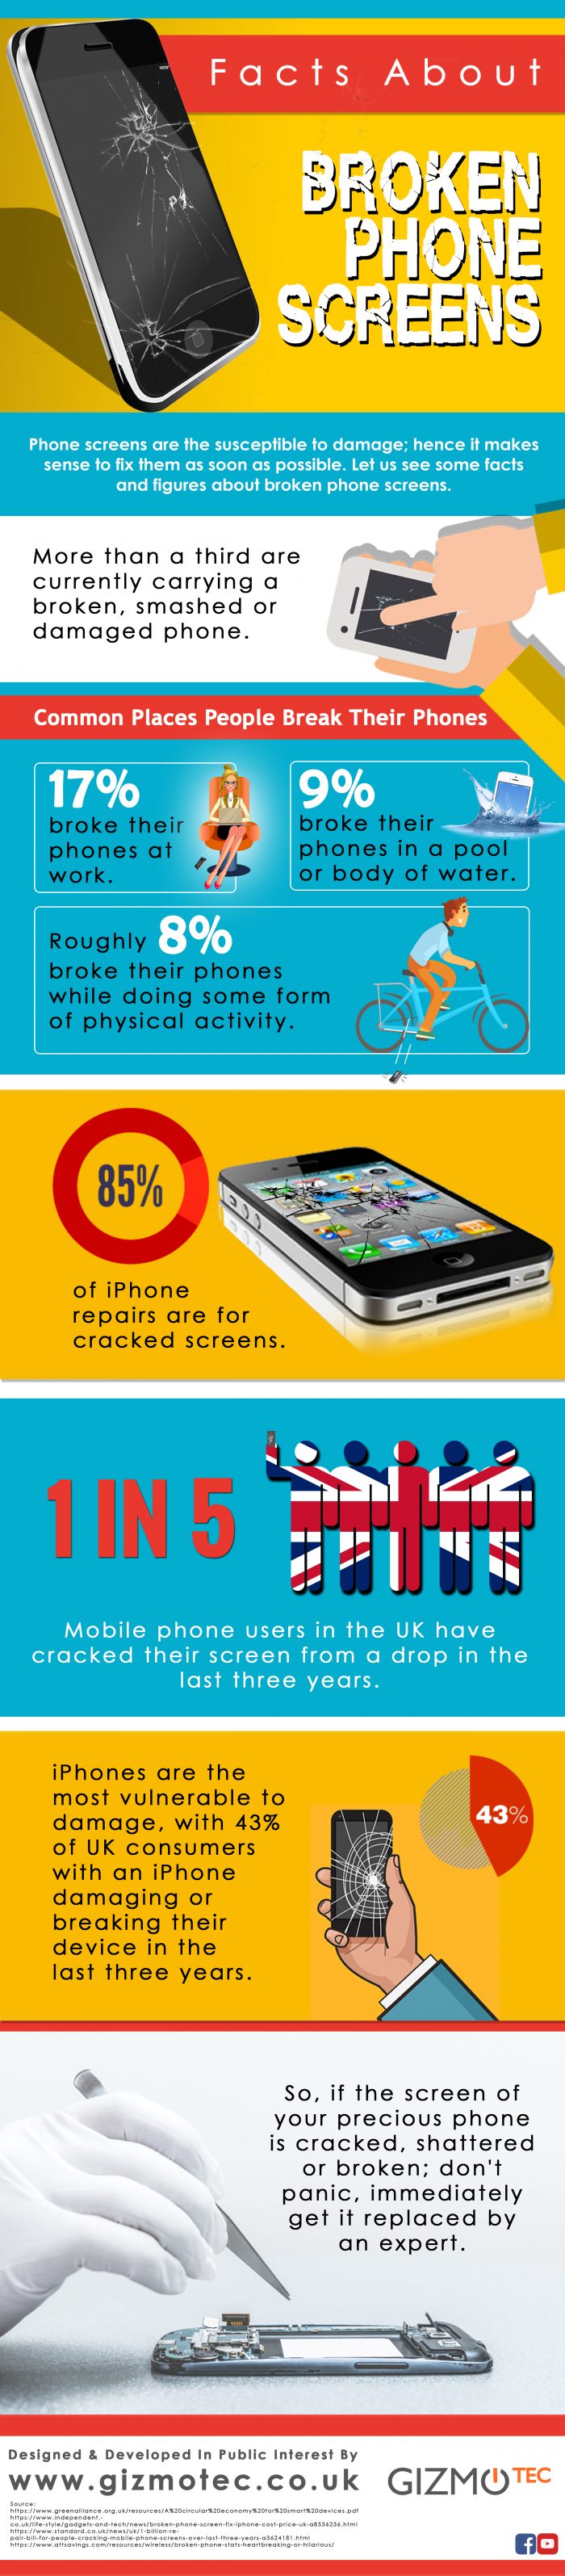 Facts About Broken Phone Screens